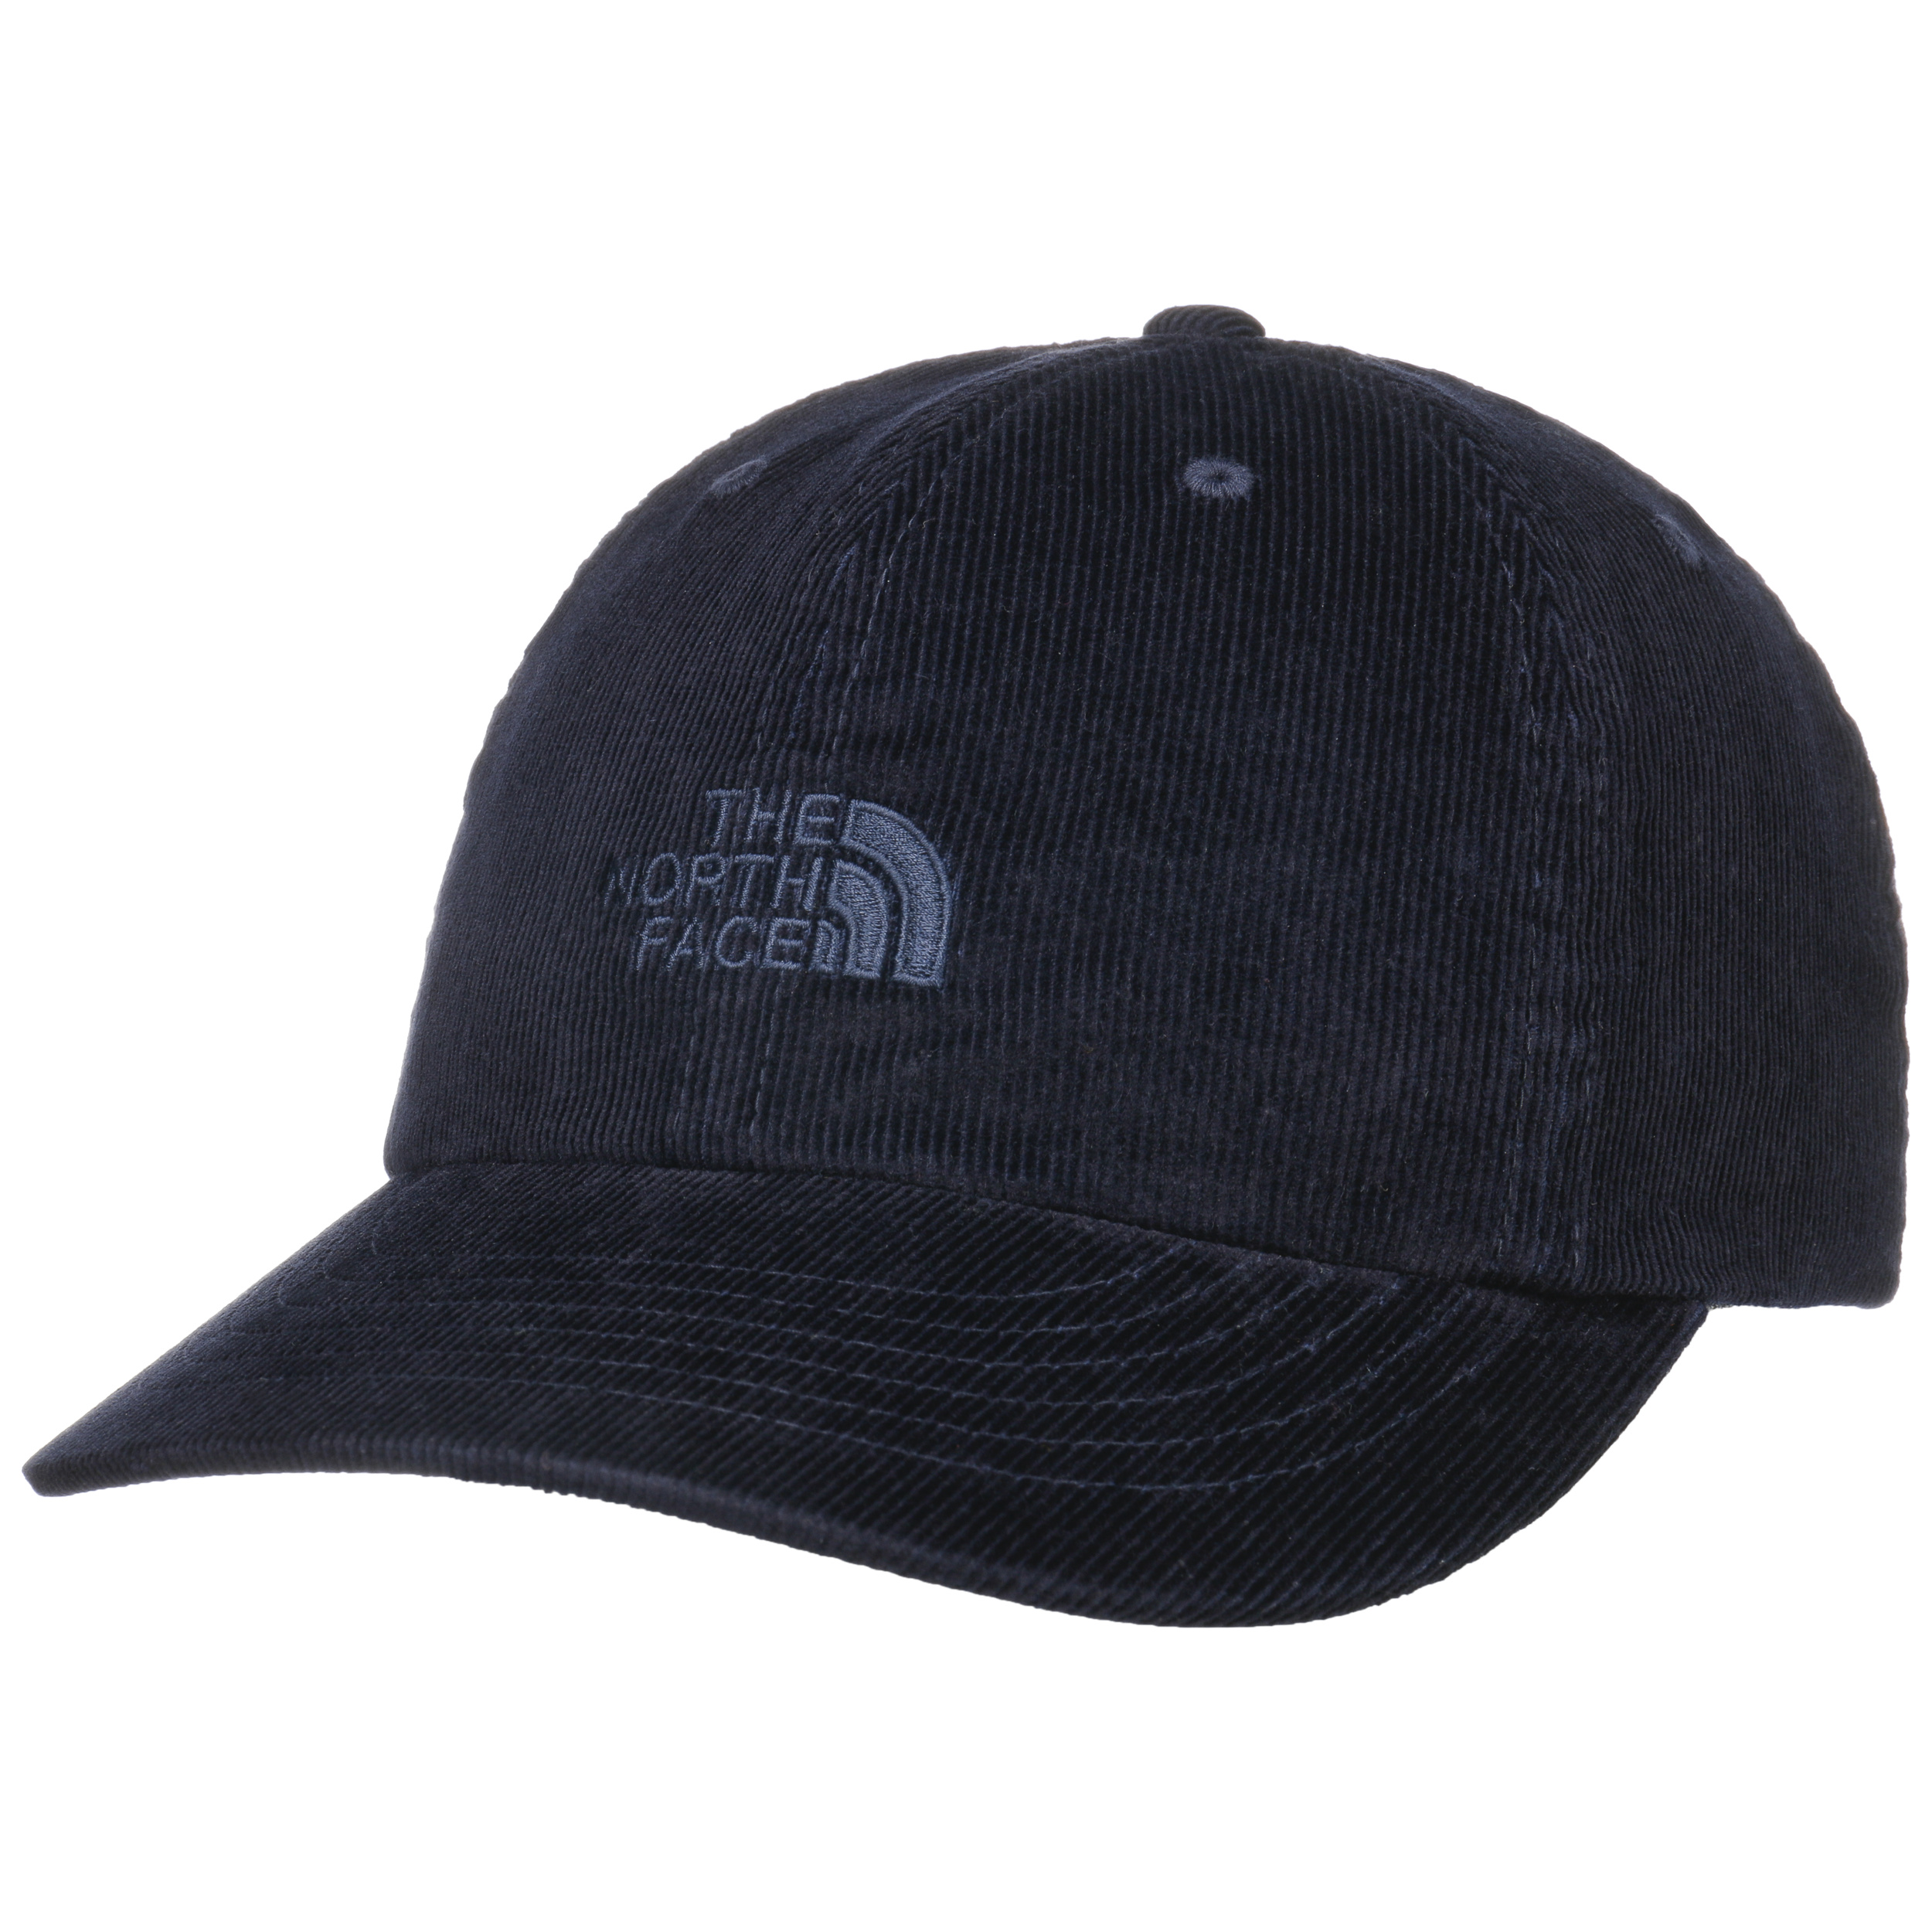 Classic Corduroy Cap by The North Face